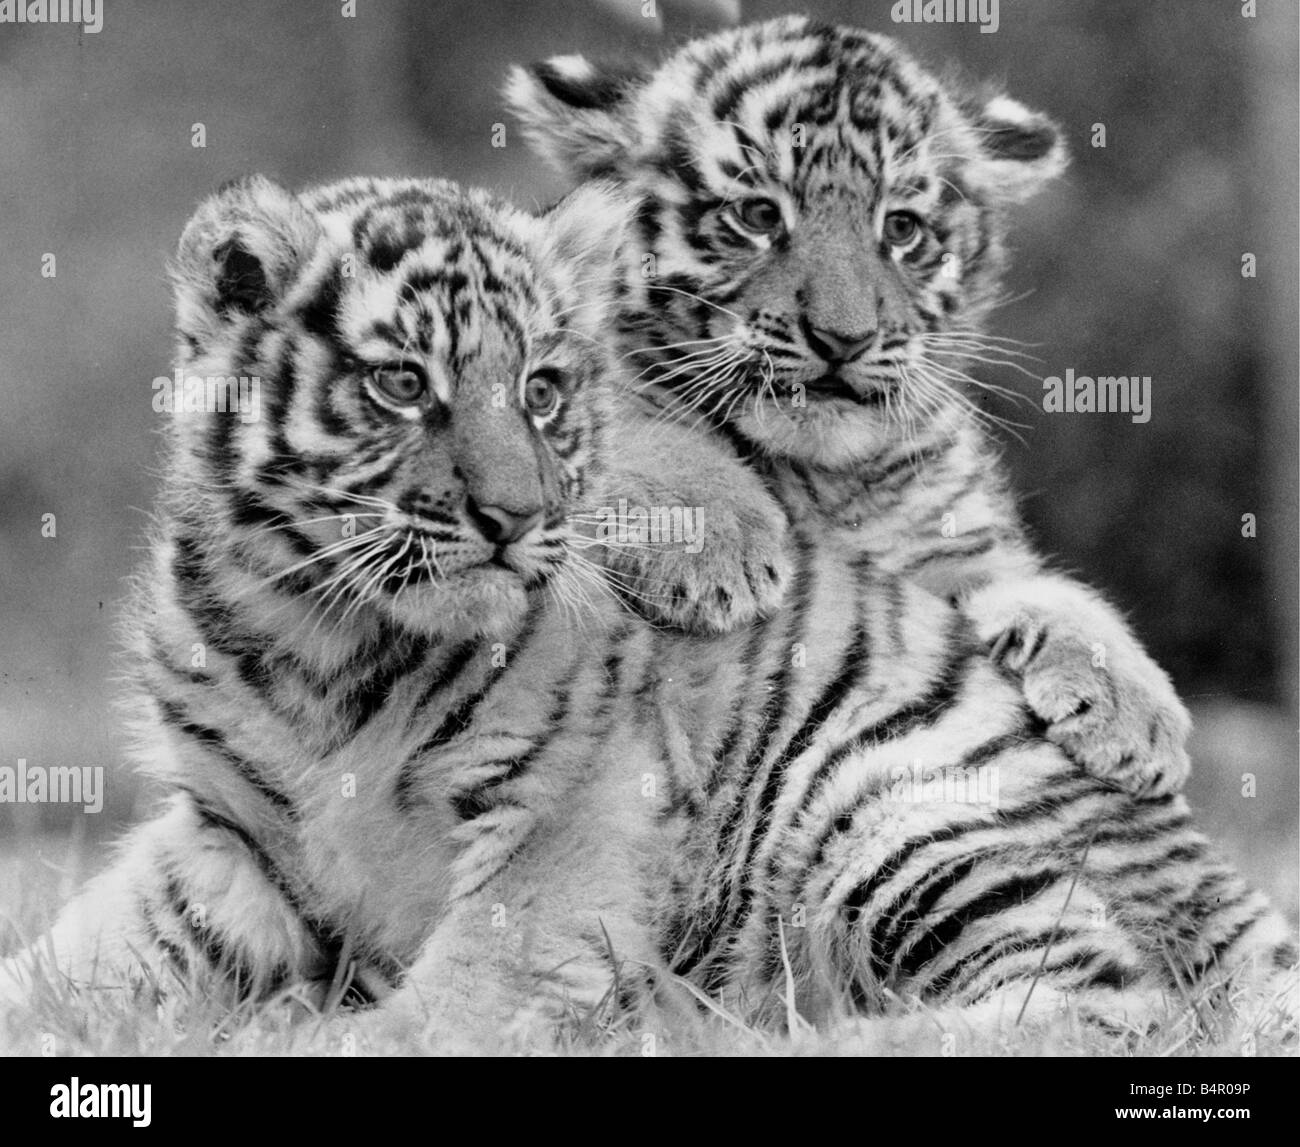 Two baby tigers Black and White Stock Photos & Images - Alamy